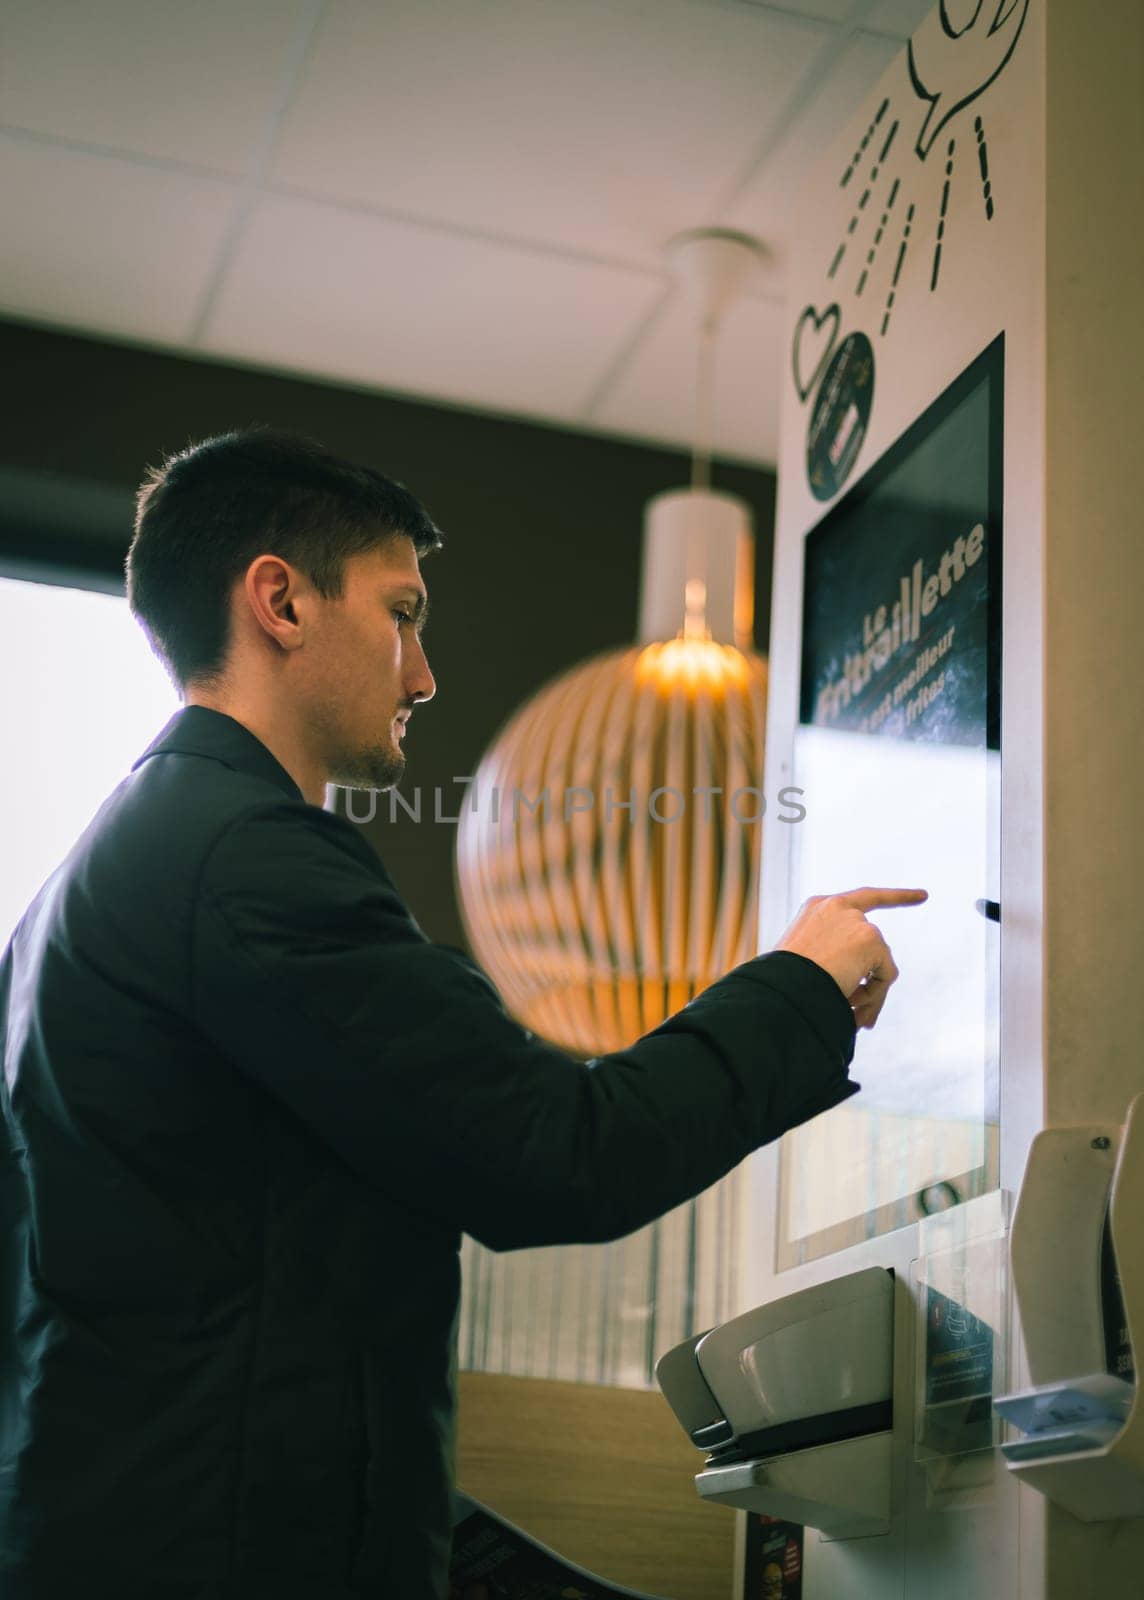 A young man makes an order for fast food on a scoreboard screen in a diner. by Nataliya